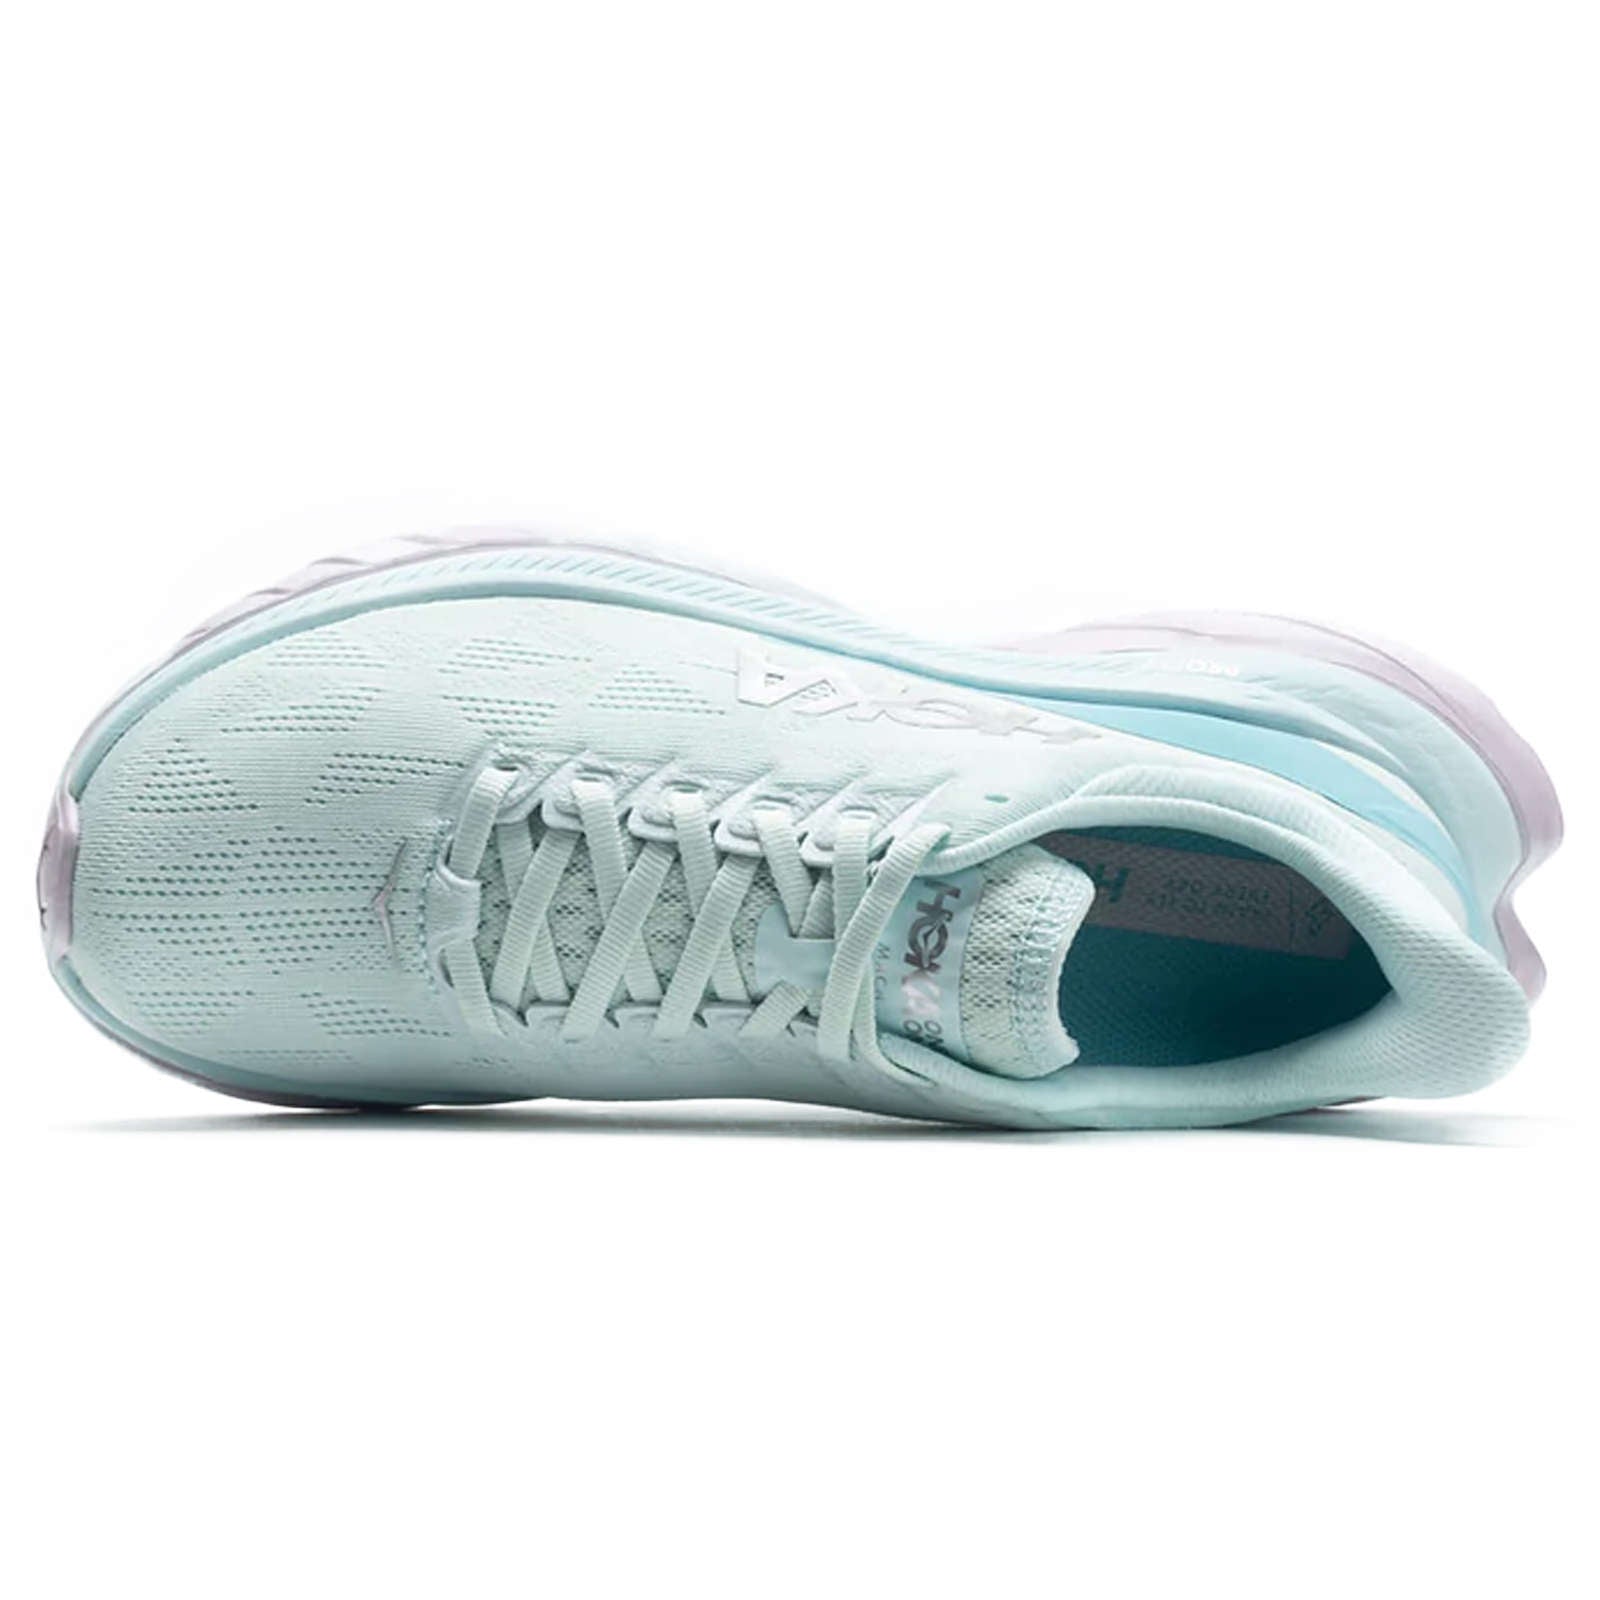 Hoka One One Mach 4 Mesh Women's Low-Top Road Running Trainers#color_blue glass coastal shade